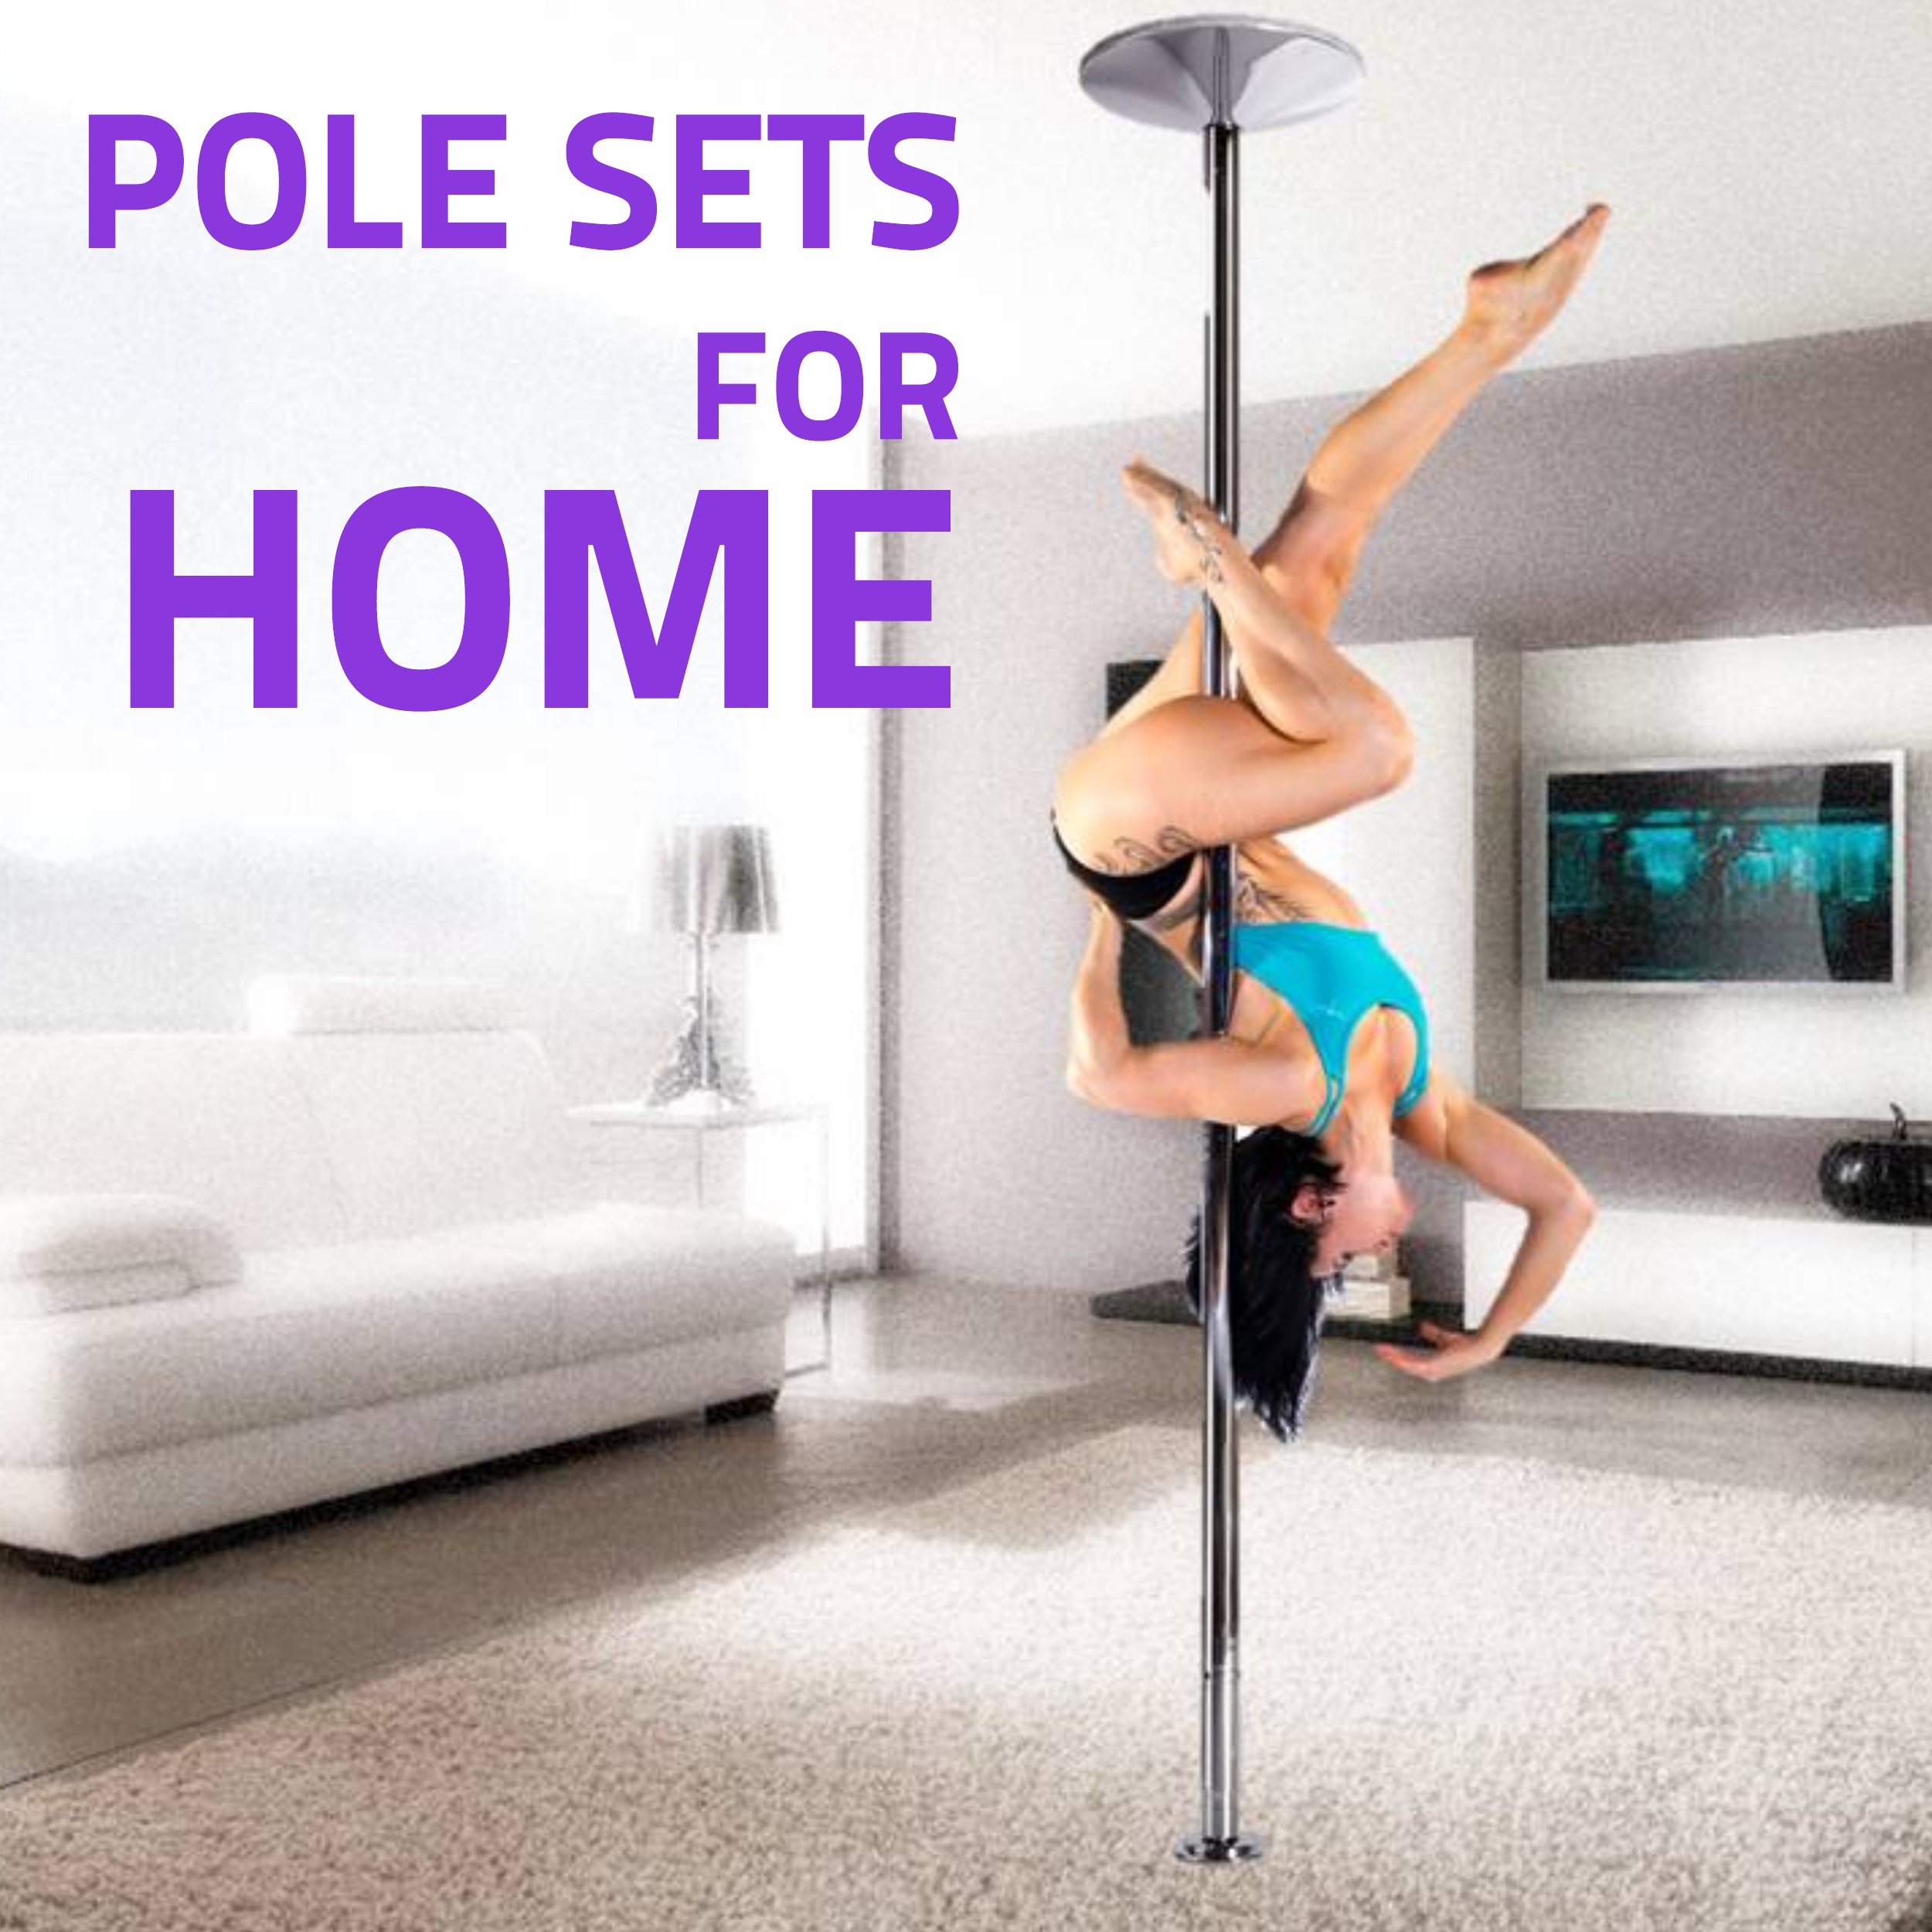 dancing pole for home